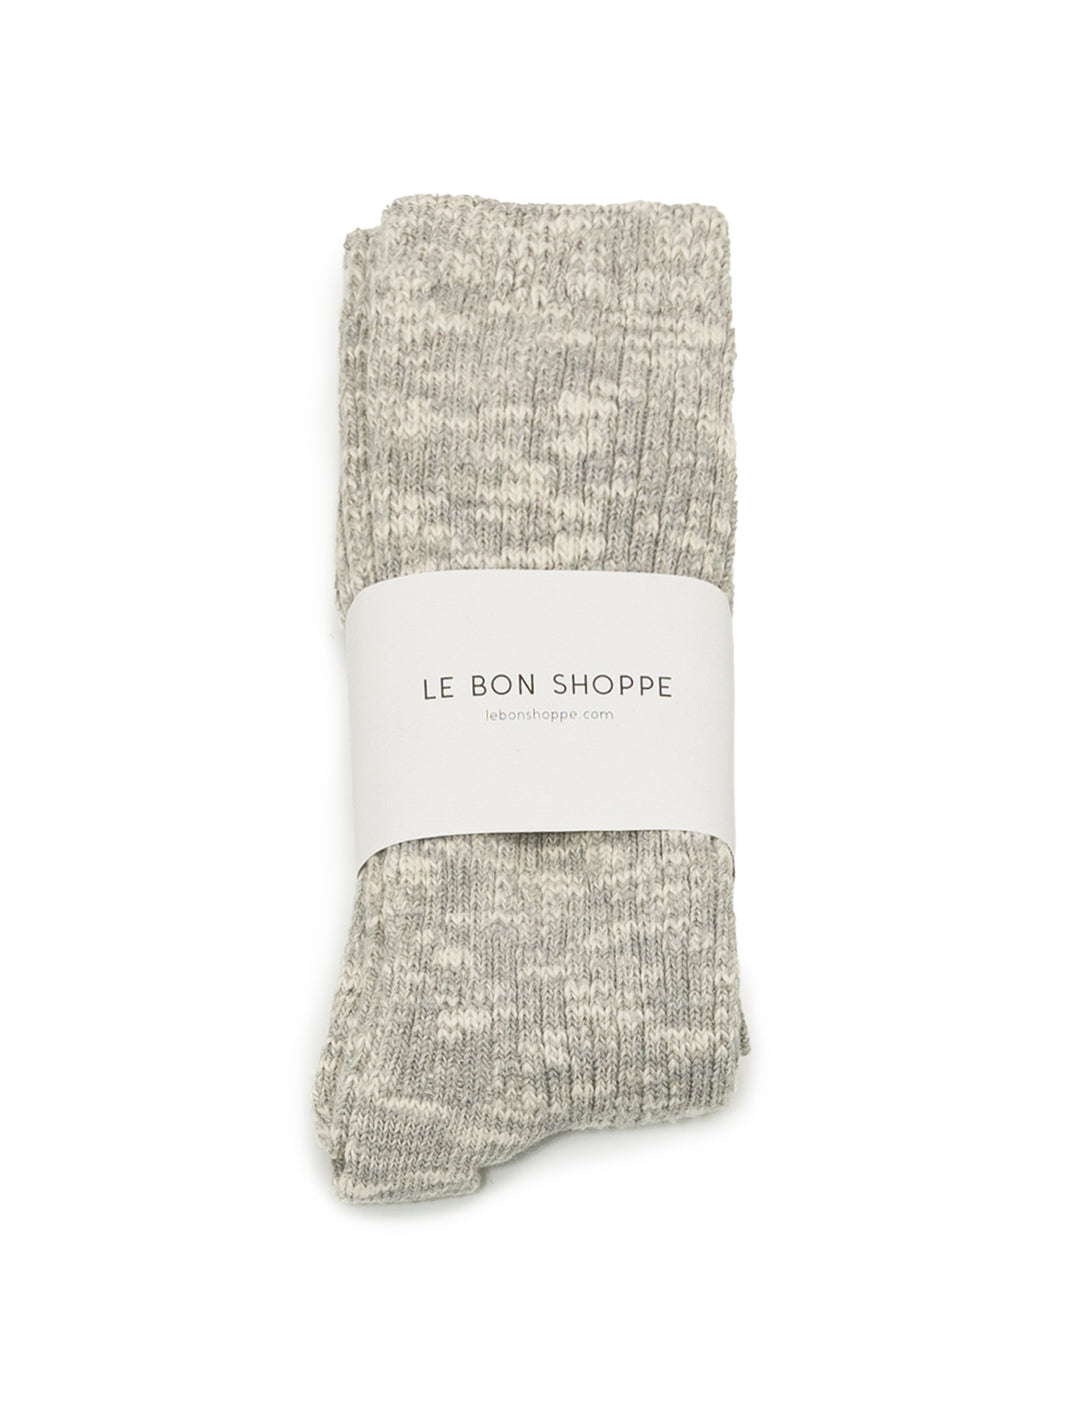 Overhead view of Le Bon Shoppe's cottage socks in heather grey.